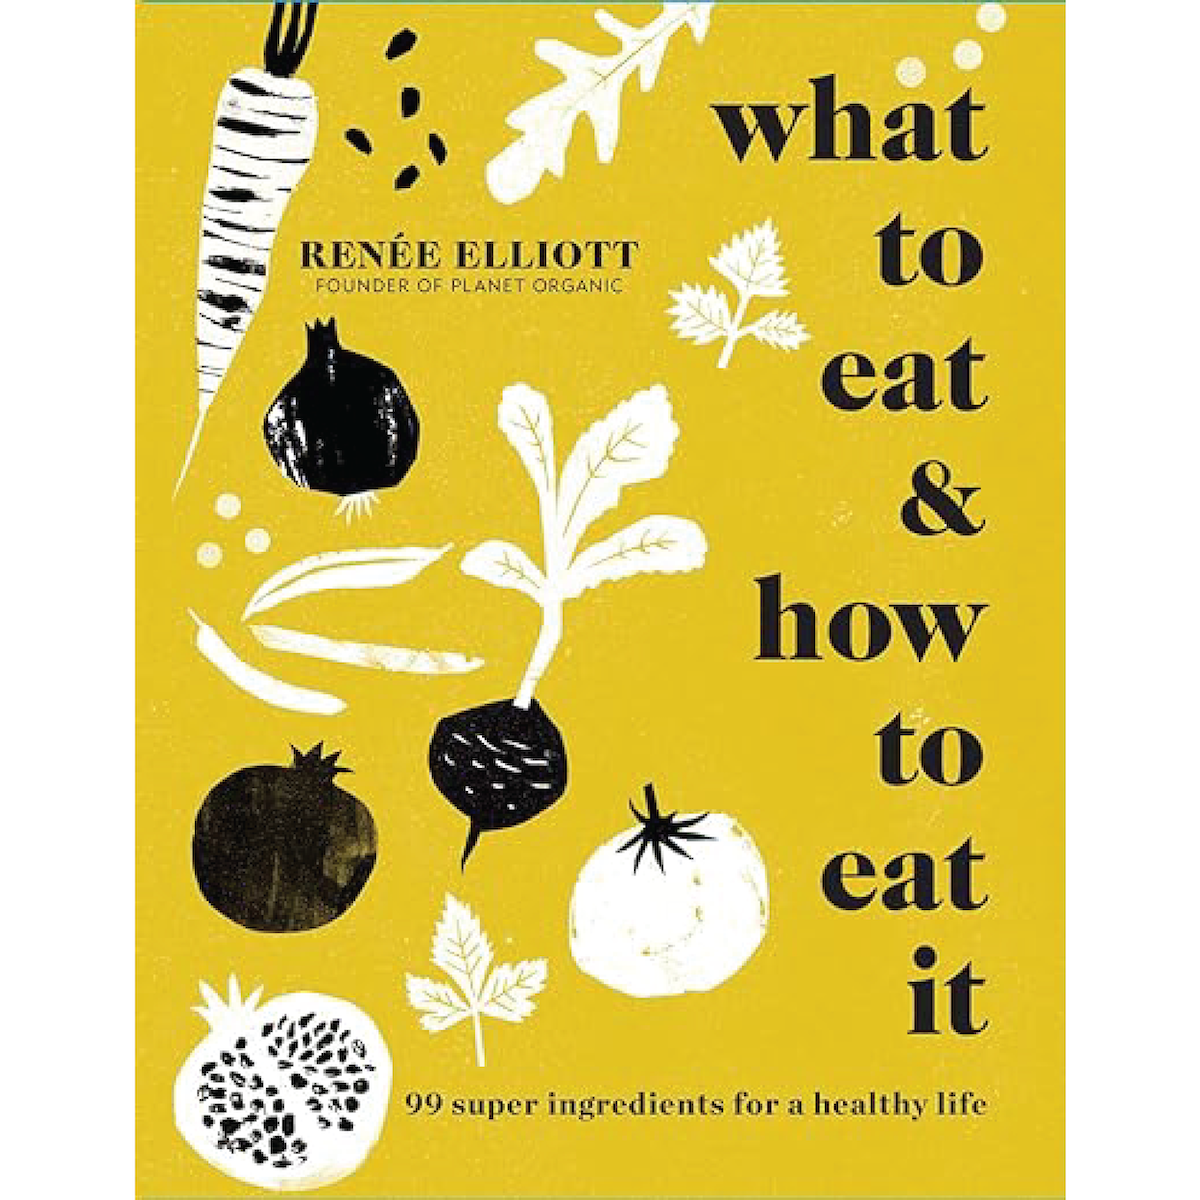 What to Eat & How to Eat It: 99 Super Ingredients for a Healthy Life by Renée Elliott